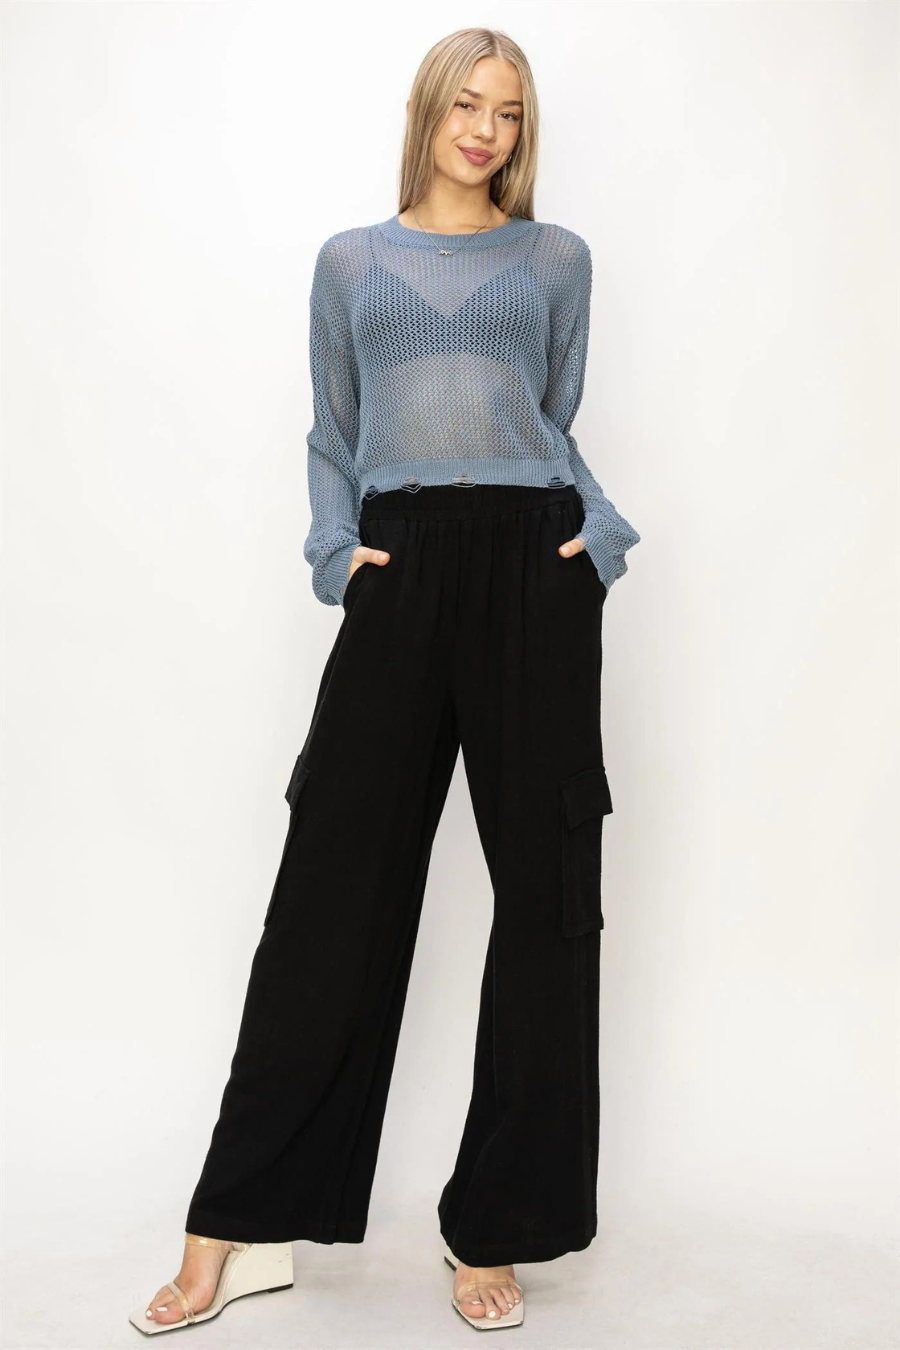 full  length front view of model wearing junie distressed knit sweater in the color ocean. model is wearing if with black cargo pants and wedge heel 